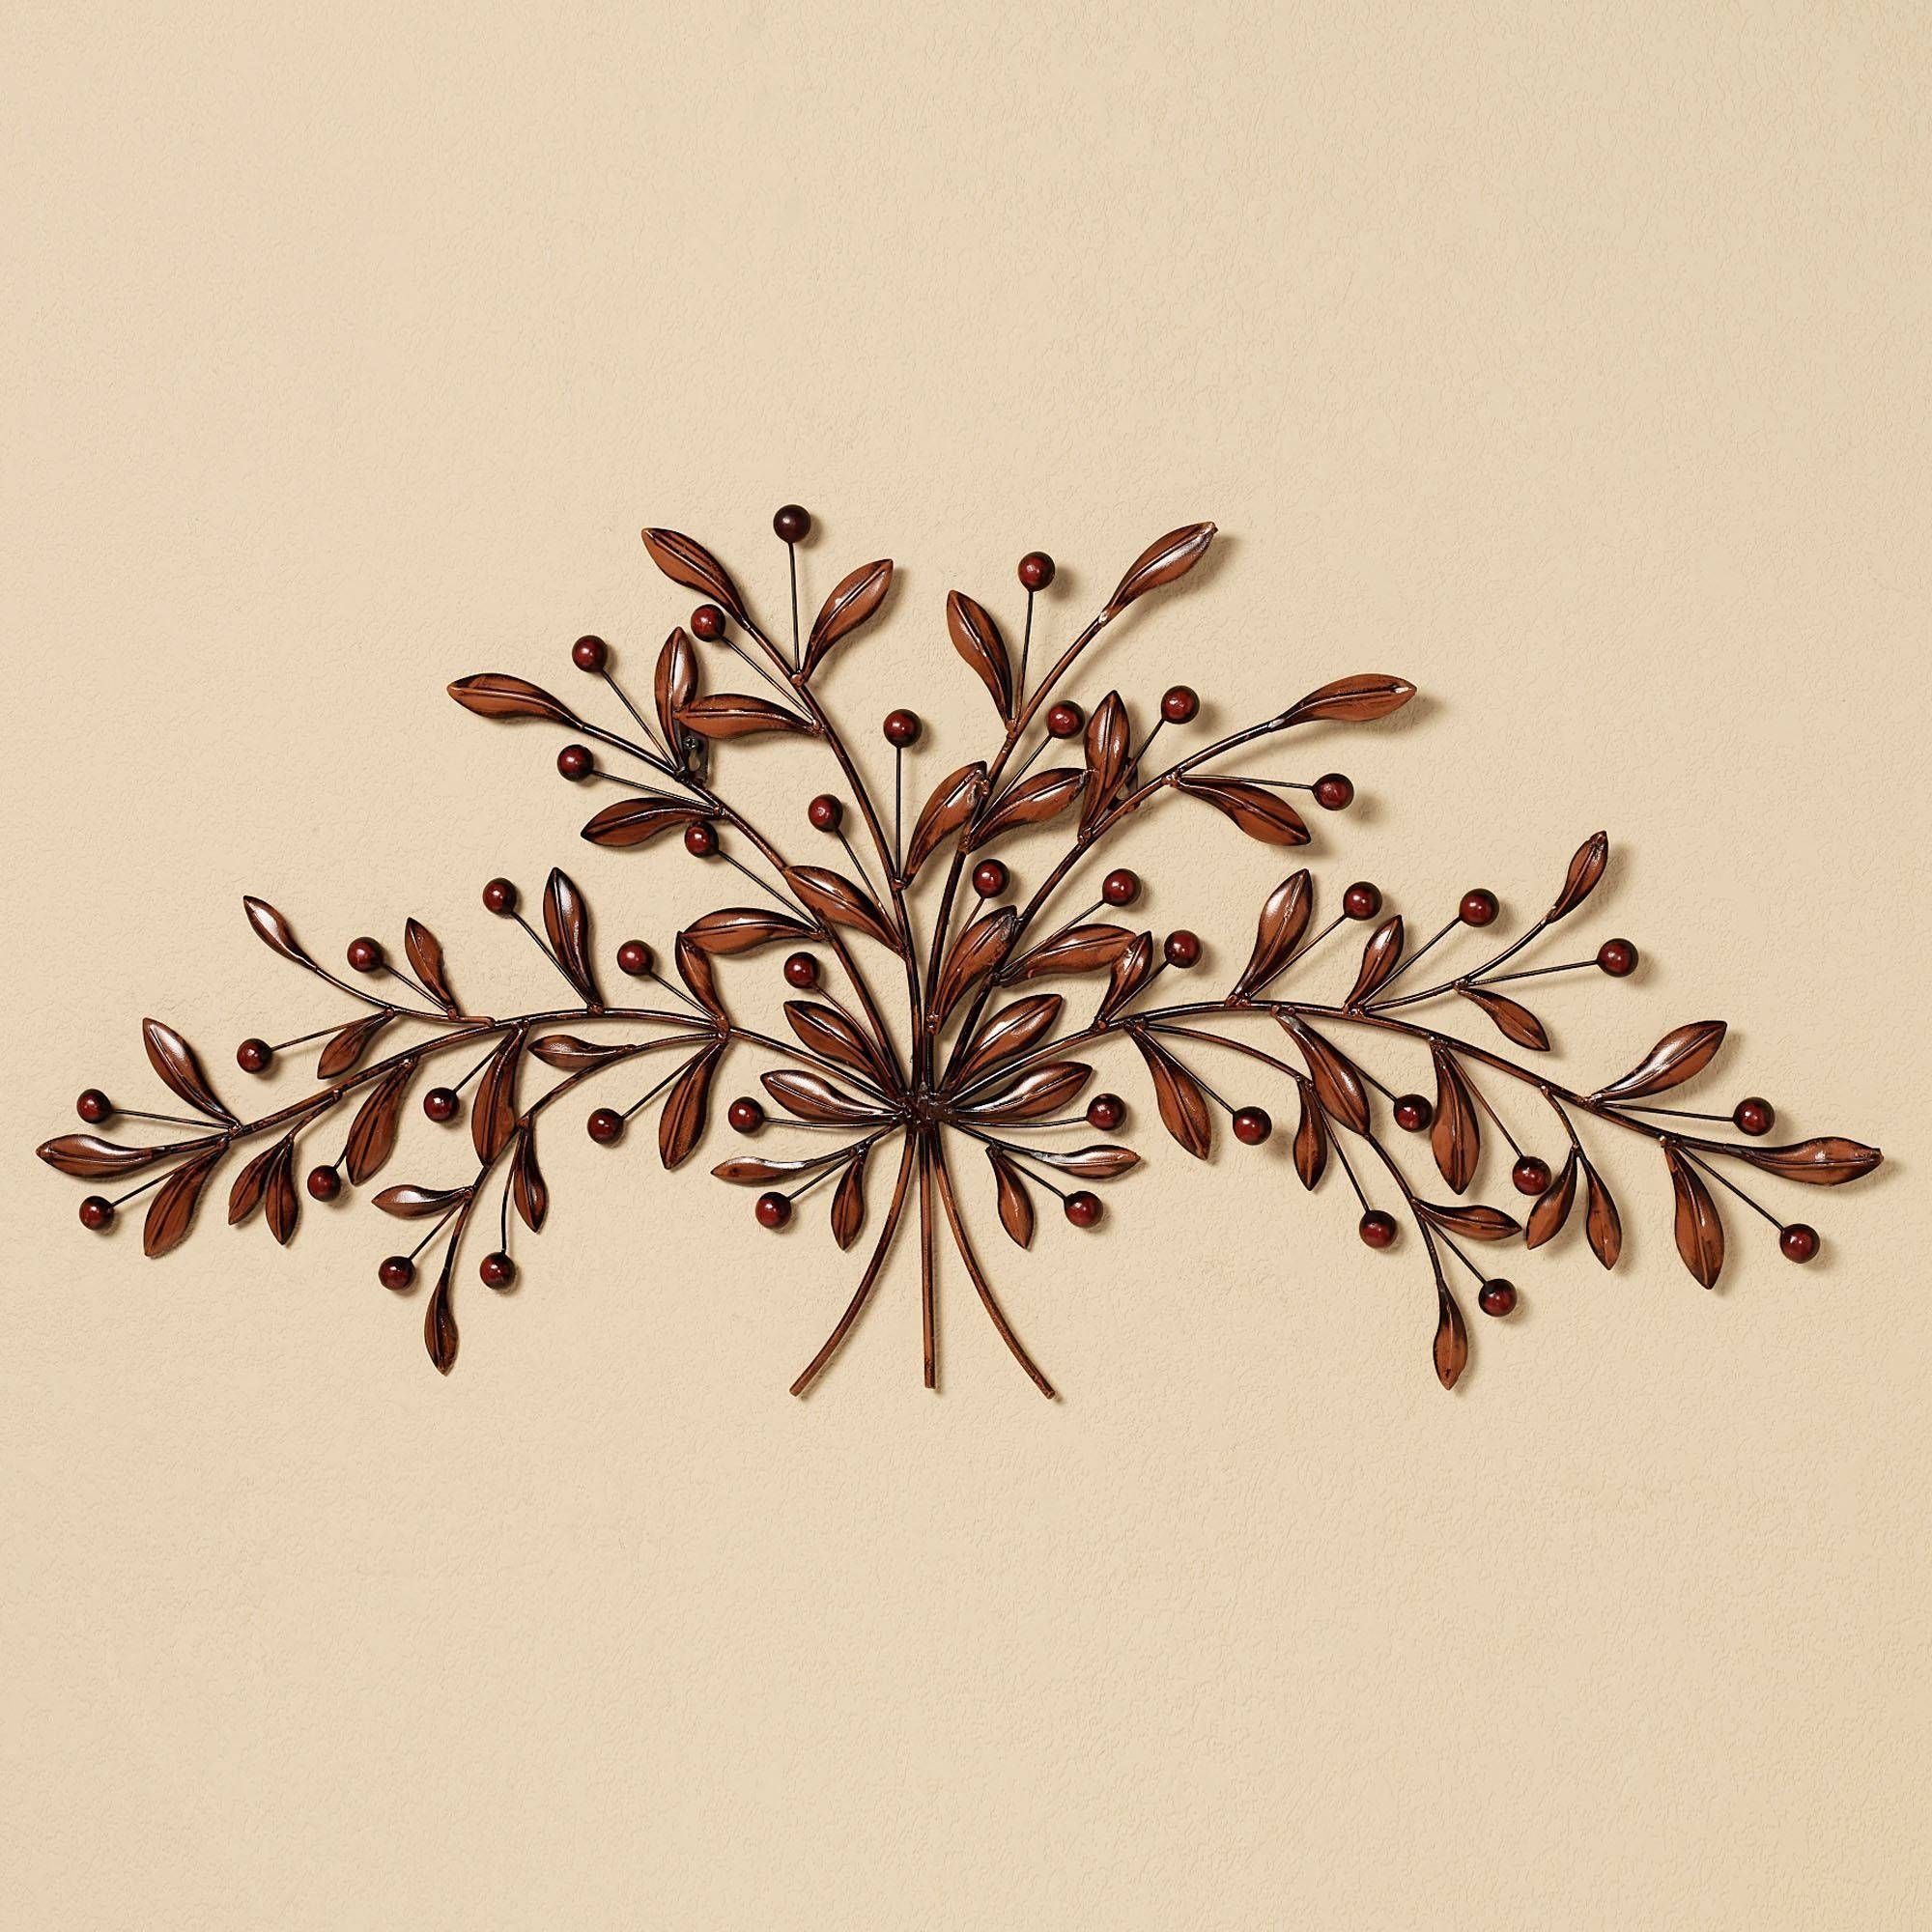 Cantabria Branch Metal Wall Art Spray Throughout Most Current Metal Wall Art Branches (View 2 of 20)